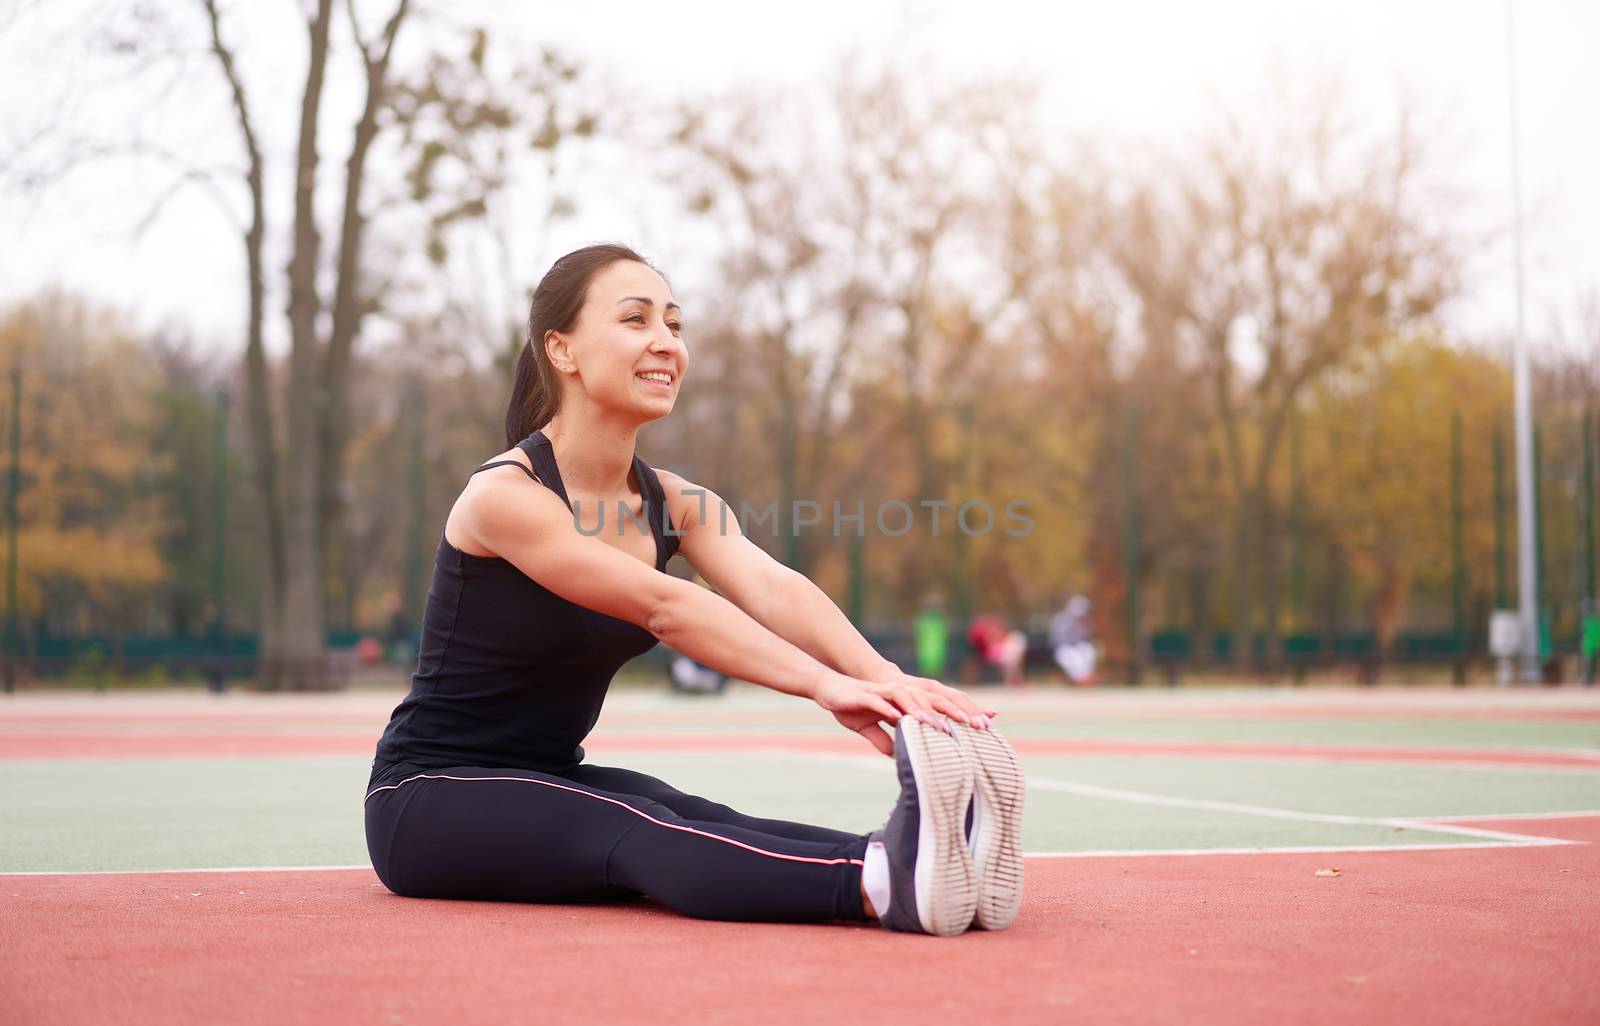 Happy girl doing fitness exercises outdoor on playground. Healthy lifestyle. Morning workout positive emotion smiling sportive people by andreonegin